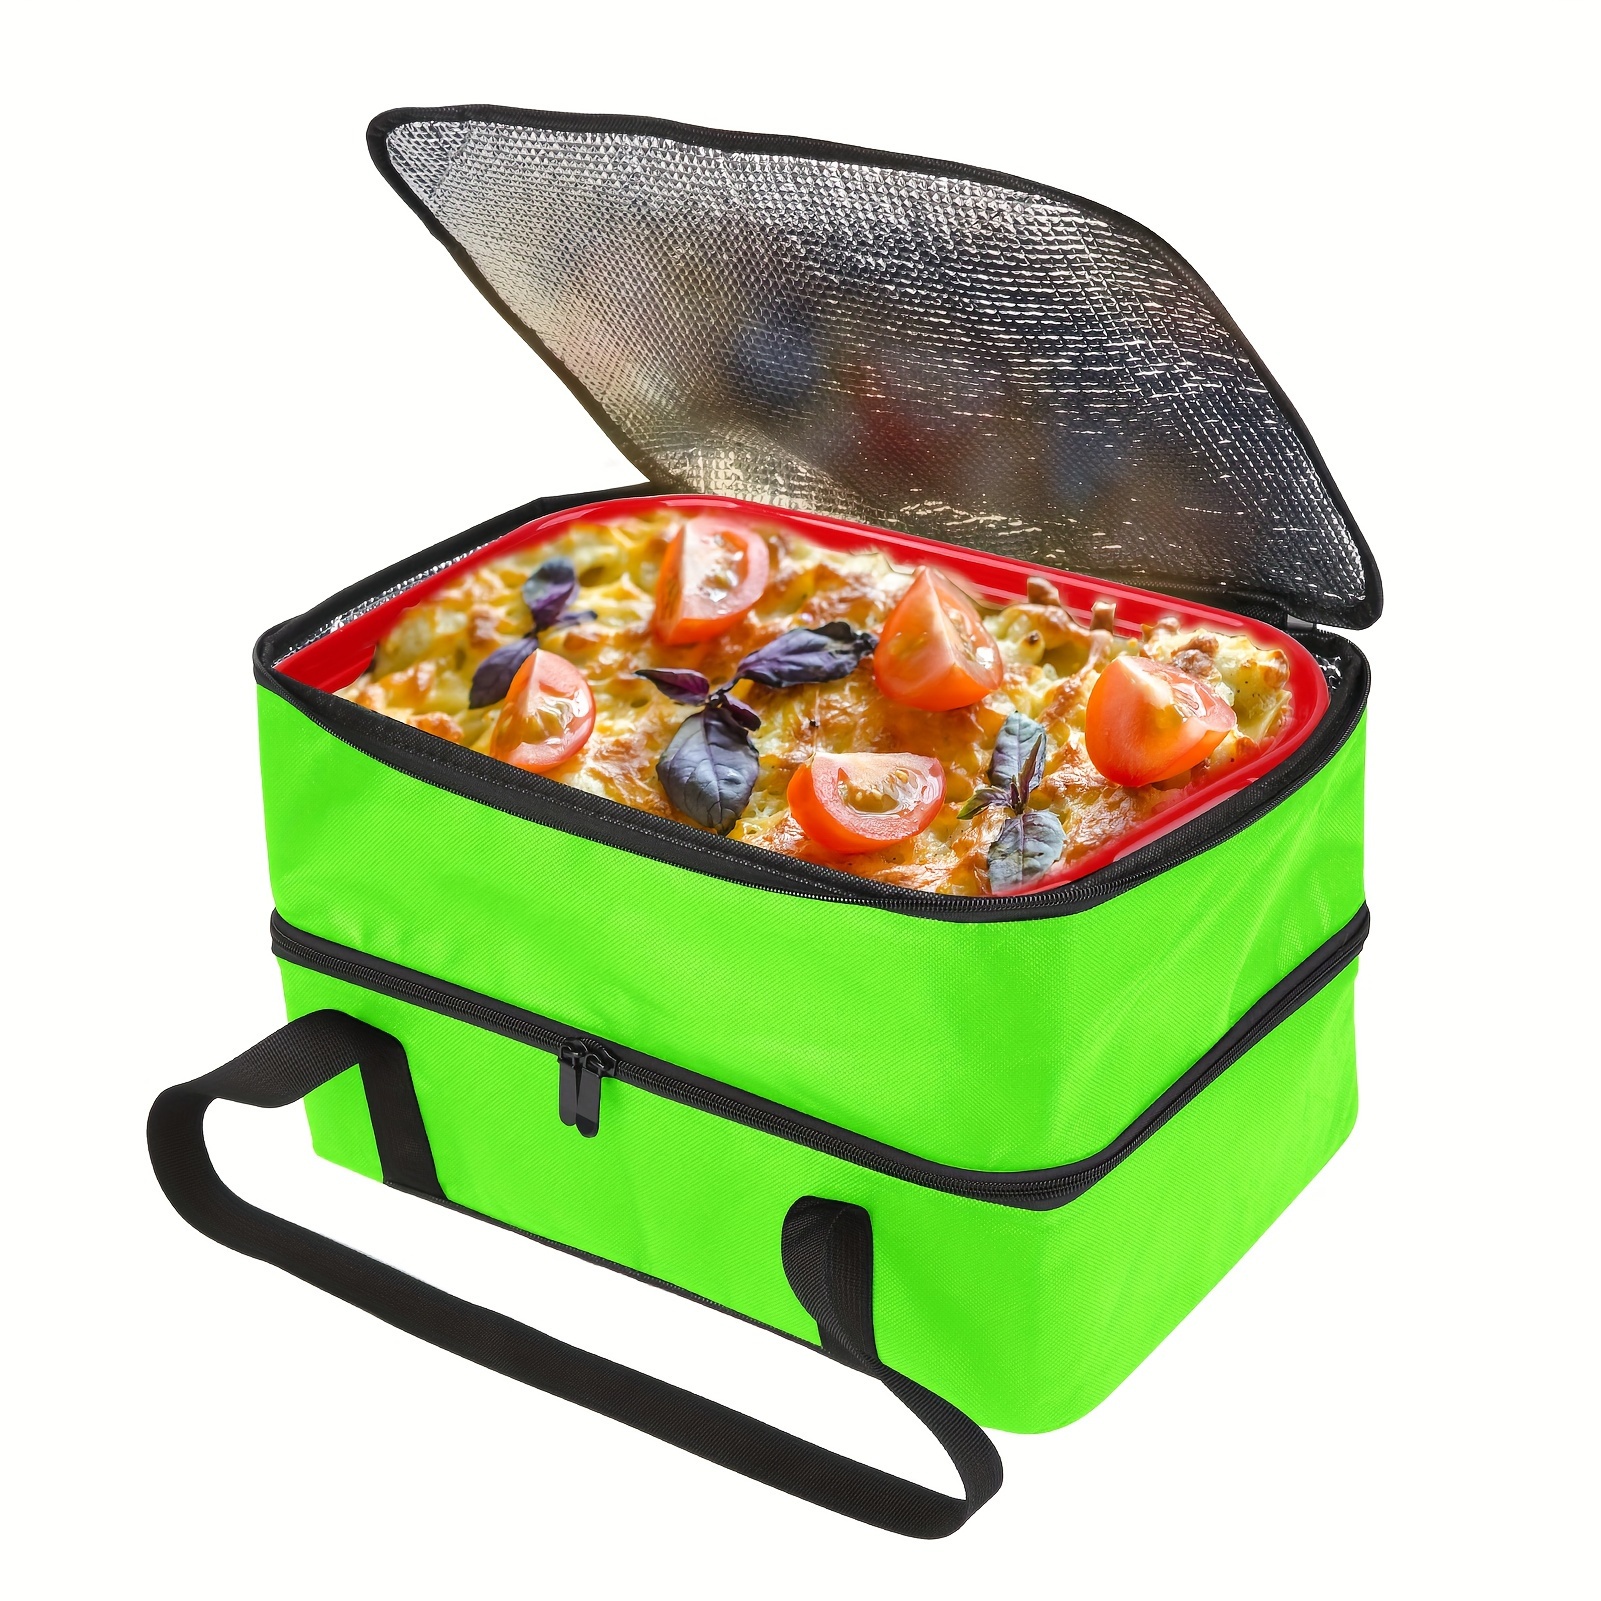 Cake and Casserole Insulated Carrier for 9x13 Pan